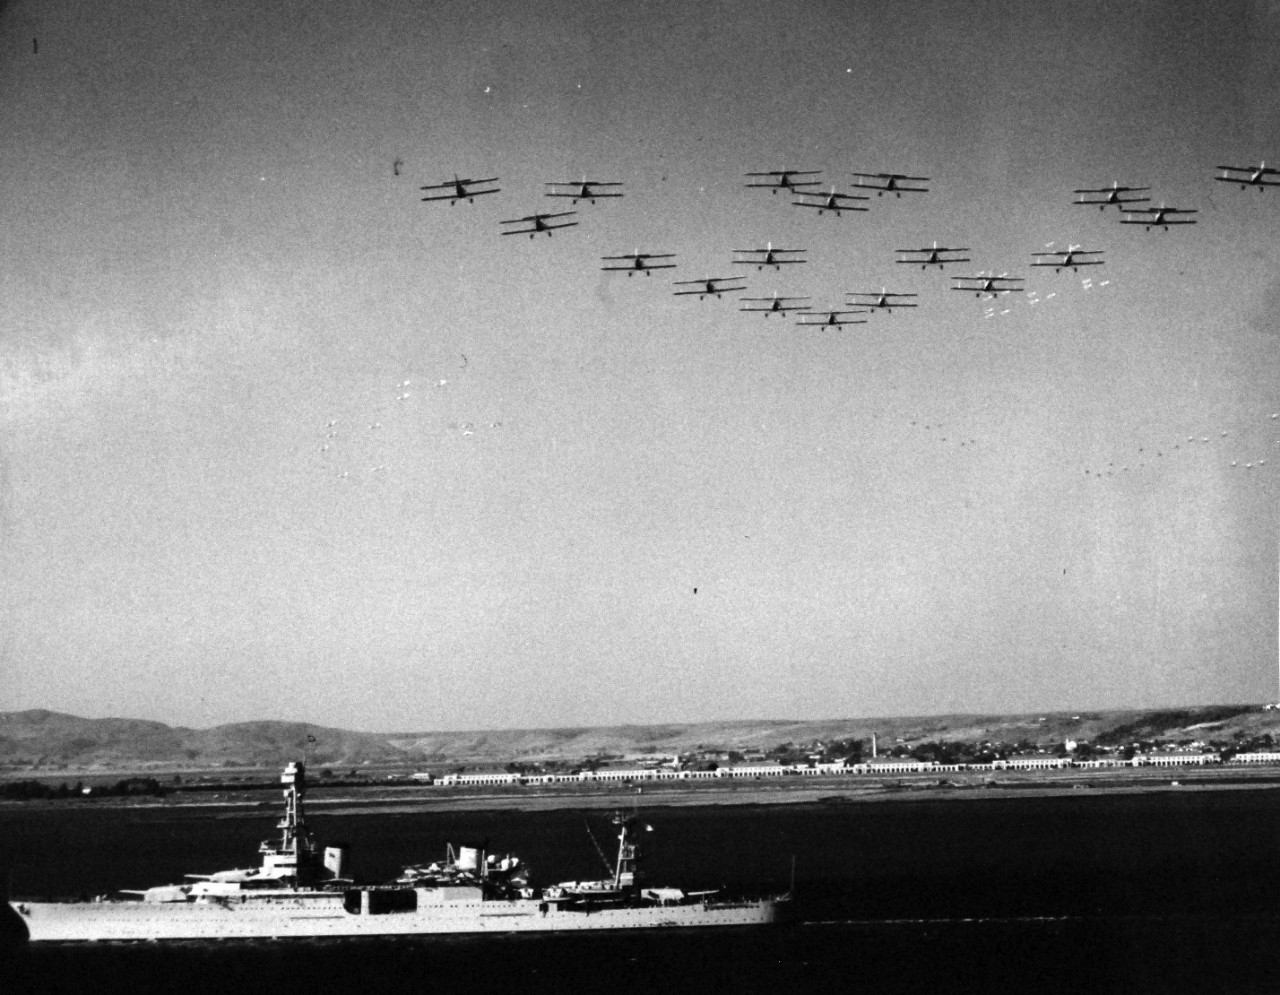 <p>80-CF-393-1: USS Houston (CA 30) leaving San Diego, California, with President Franklin D. Roosevelt and Admiral J.M. Reeves, Commander in Chief, U.S. Fleet on board to review fleet maneuvers at sea, October 2, 1935.&nbsp;</p>
